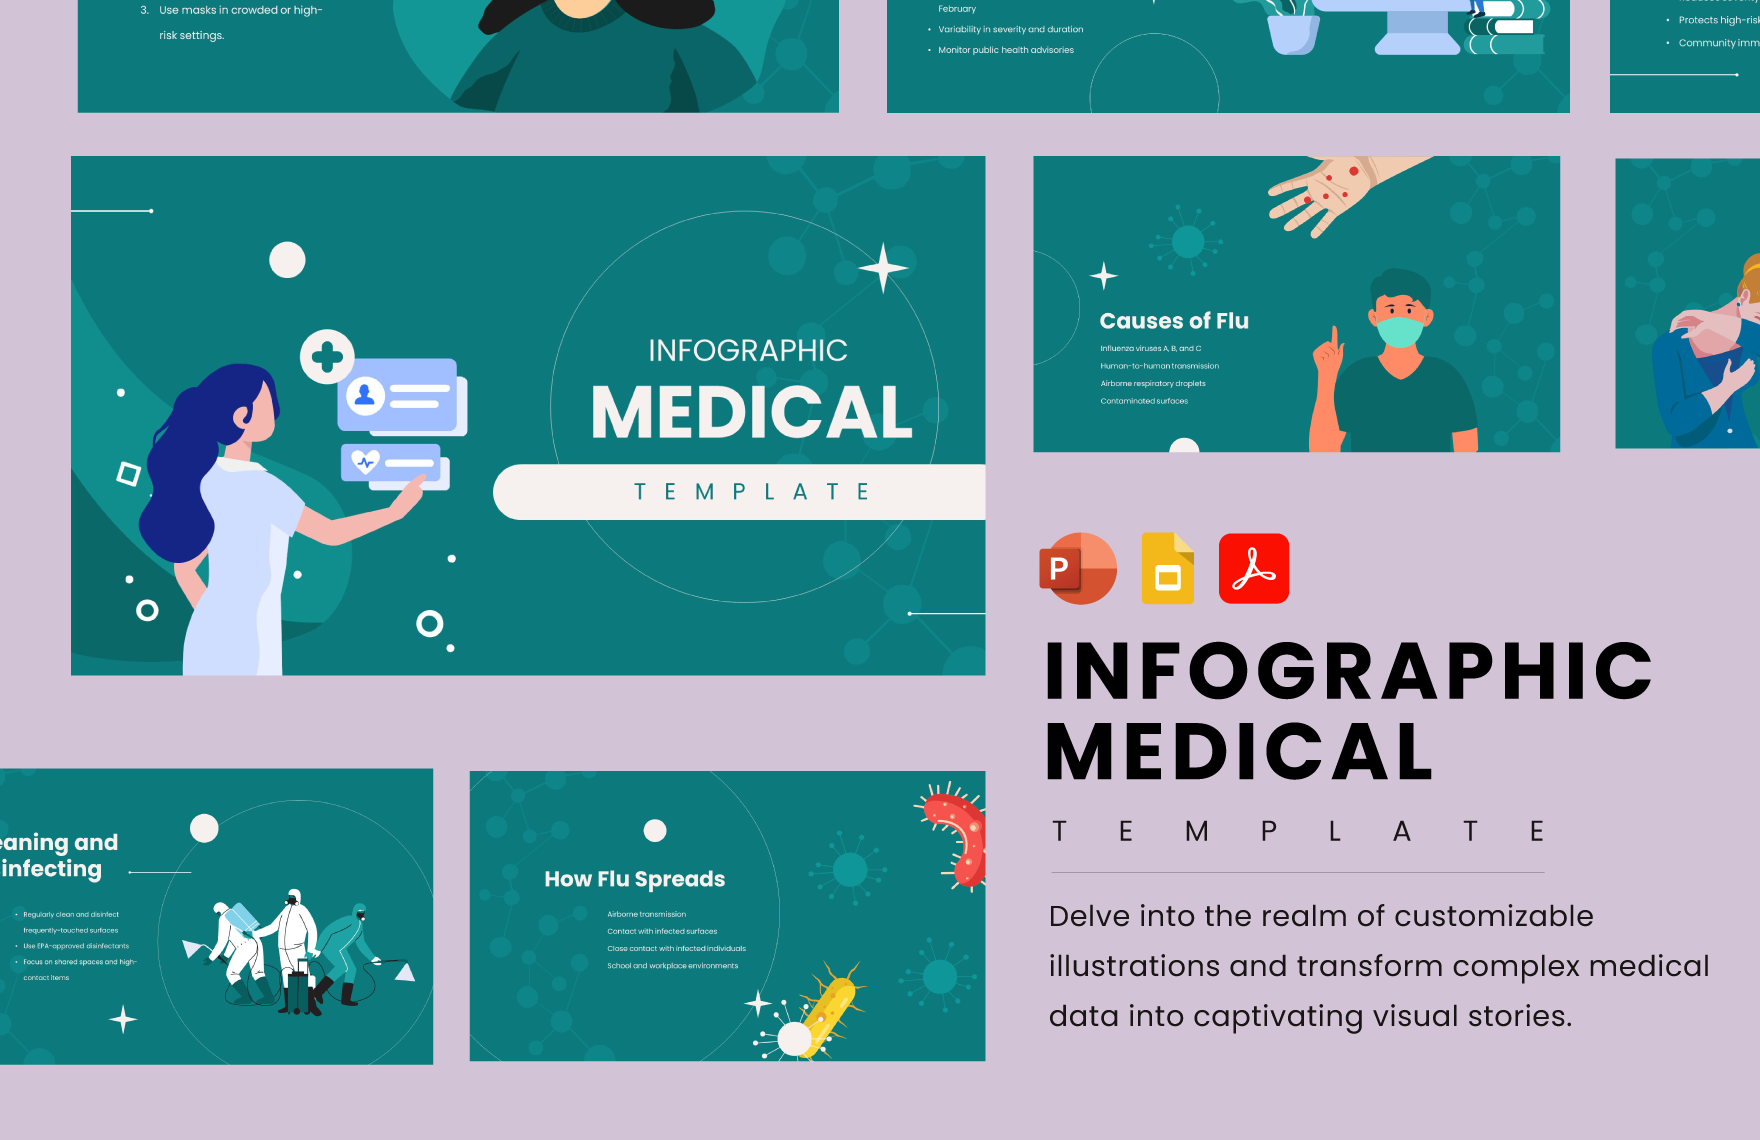 Infographic Medical Template